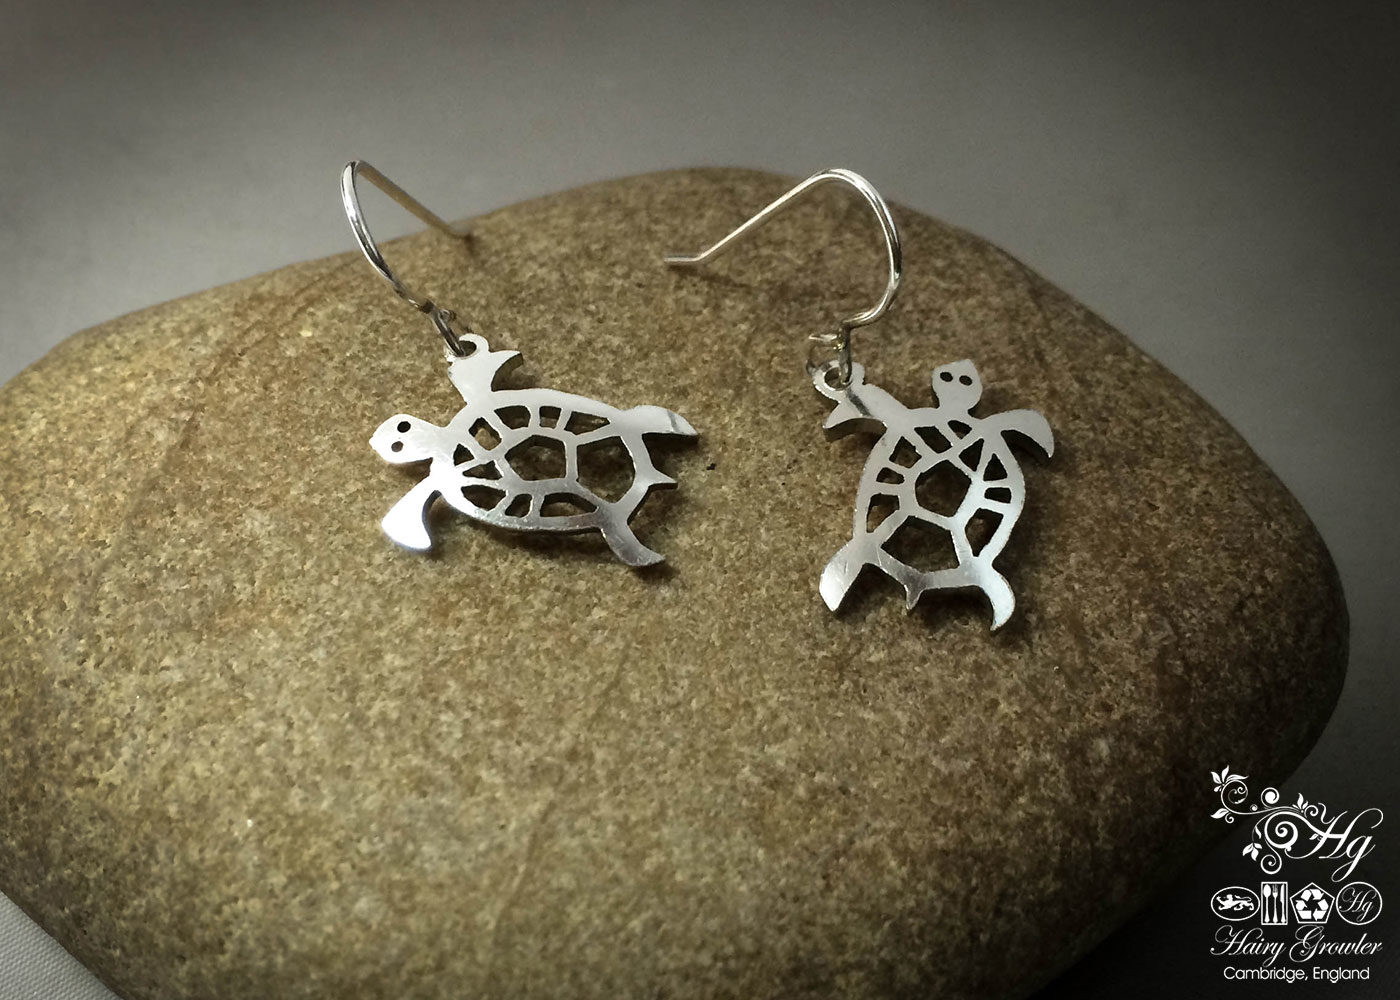 The Official Hairy Growler Jewellery Co. Cambridge - handcrafted and recycled spoon turtle earrings